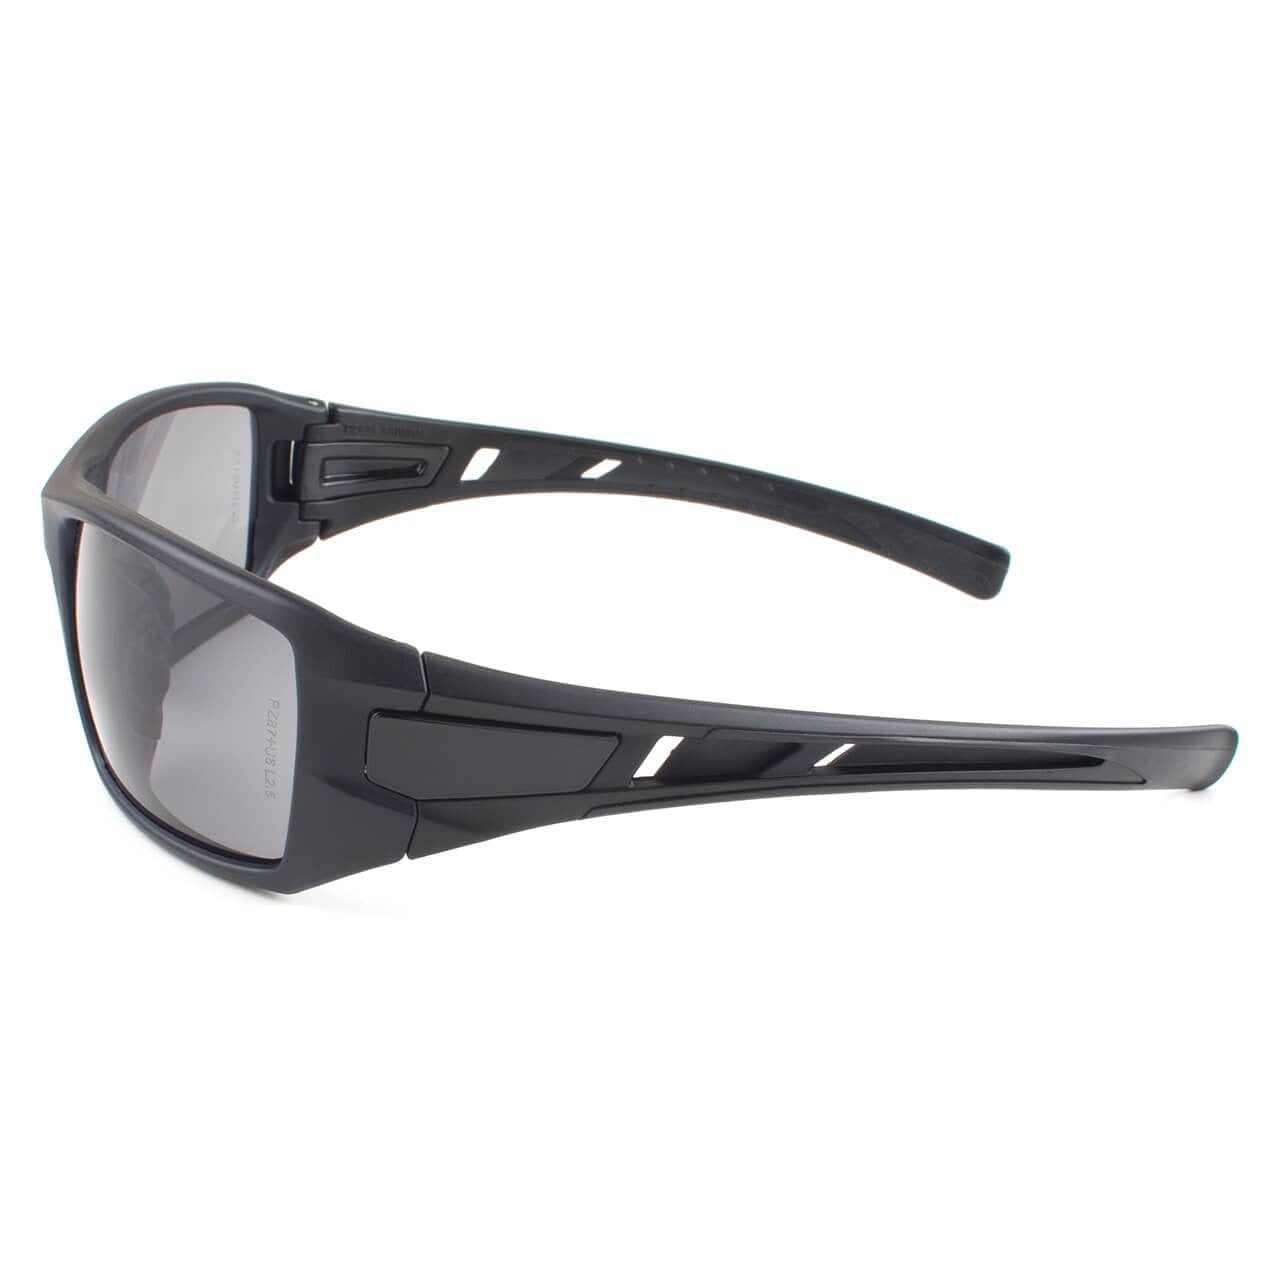 Metel M30 Safety Glasses with Black Frame and Gray Lenses Side View